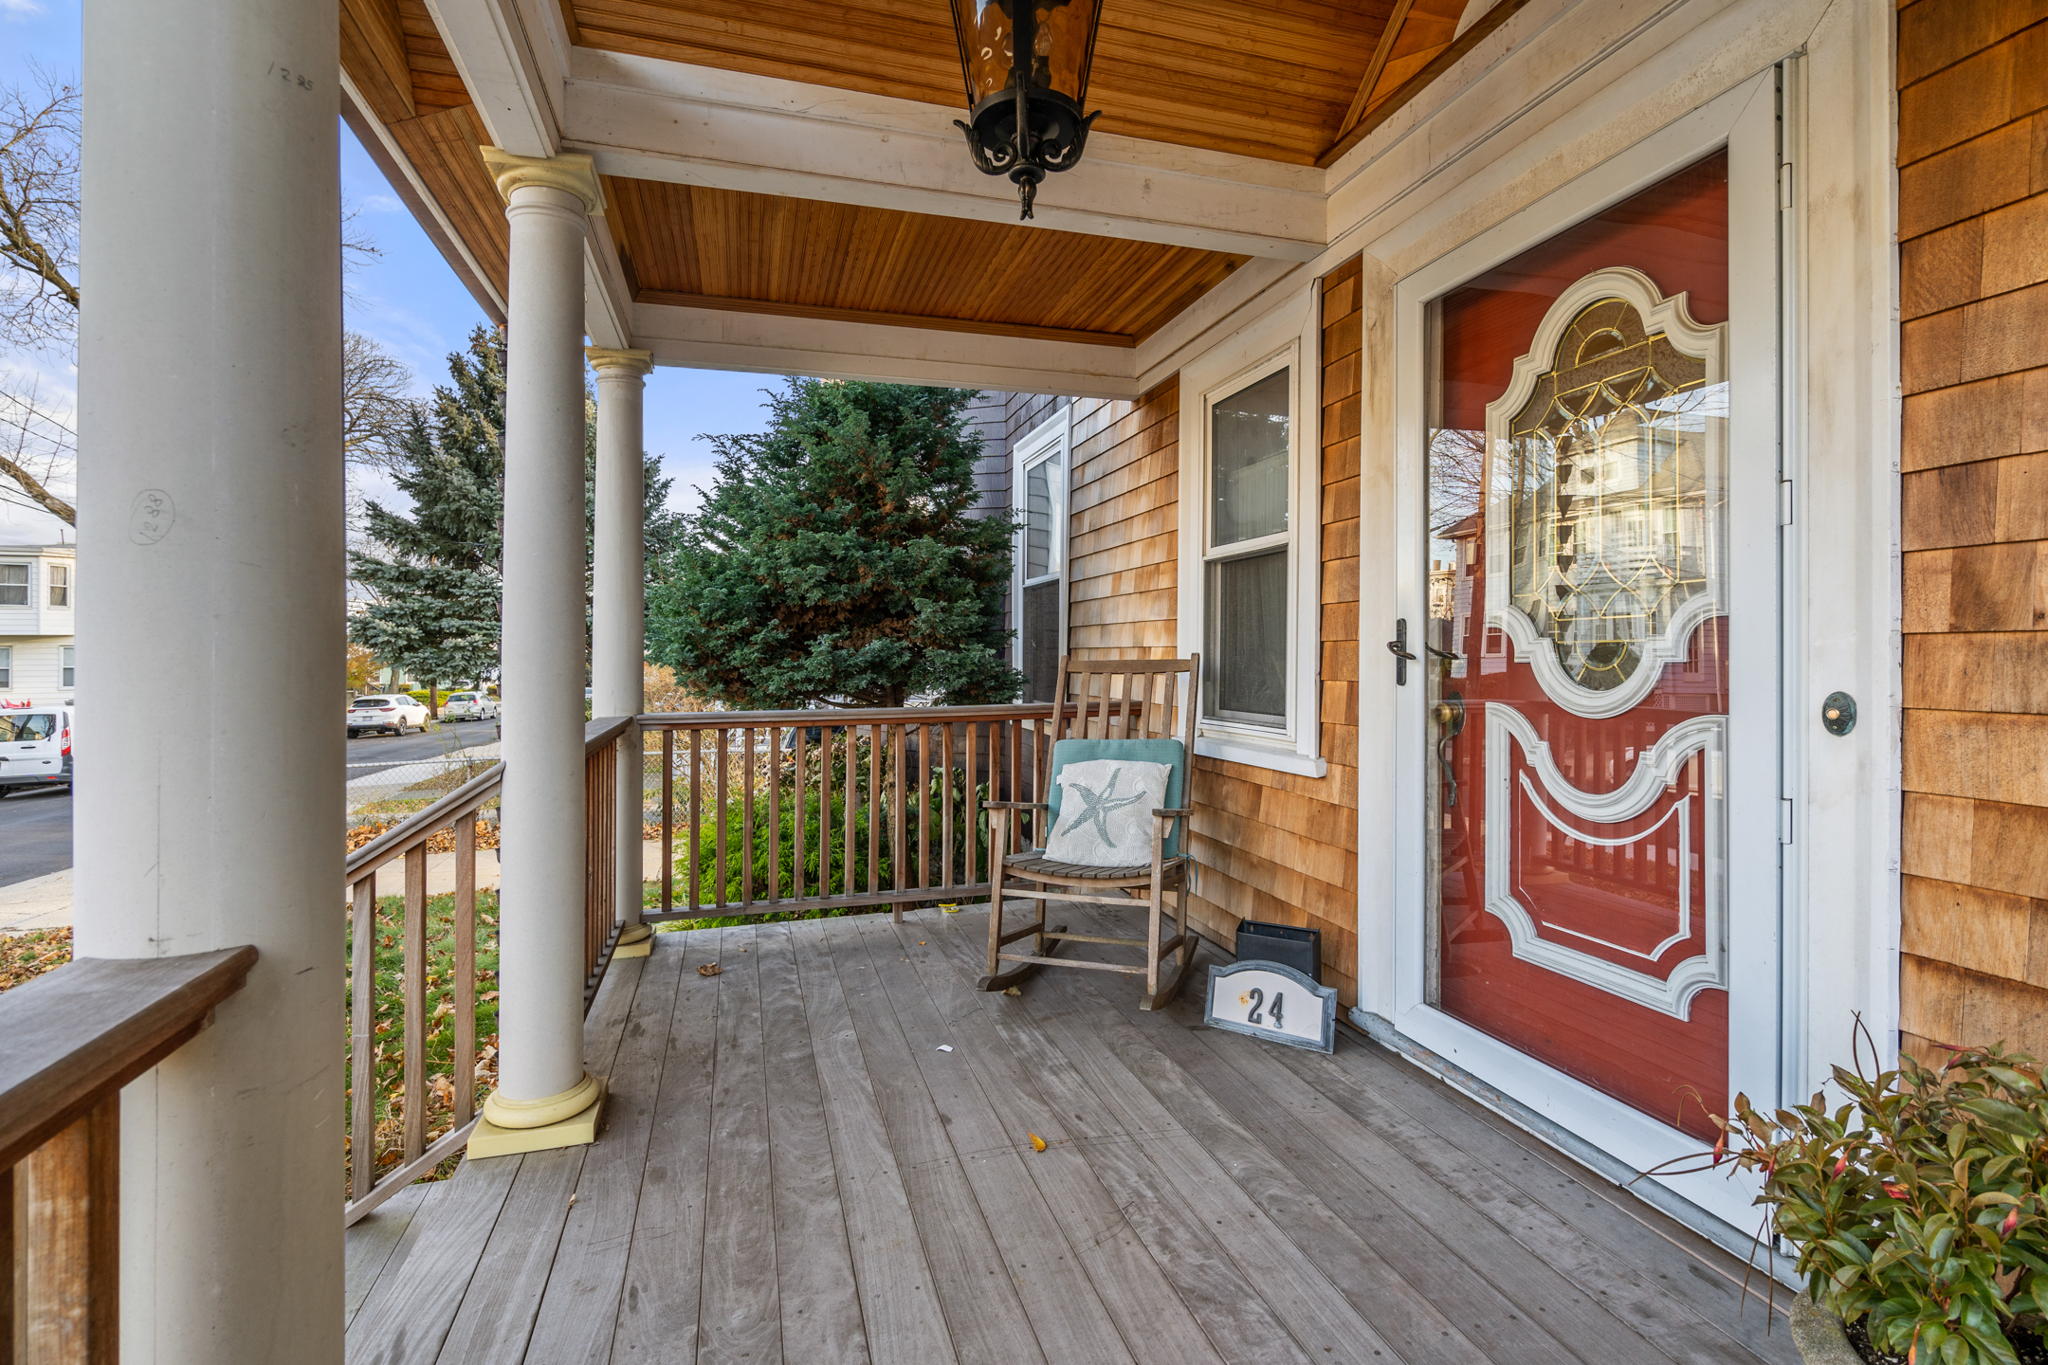 A view of the home's wooden front porch, which has white columns, cedar shake shingles, a black lantern, a rocking chair, a blue box on the planks with the house address number on it (24), and a red front door with elaborate white trim that looks almost Moroccan.